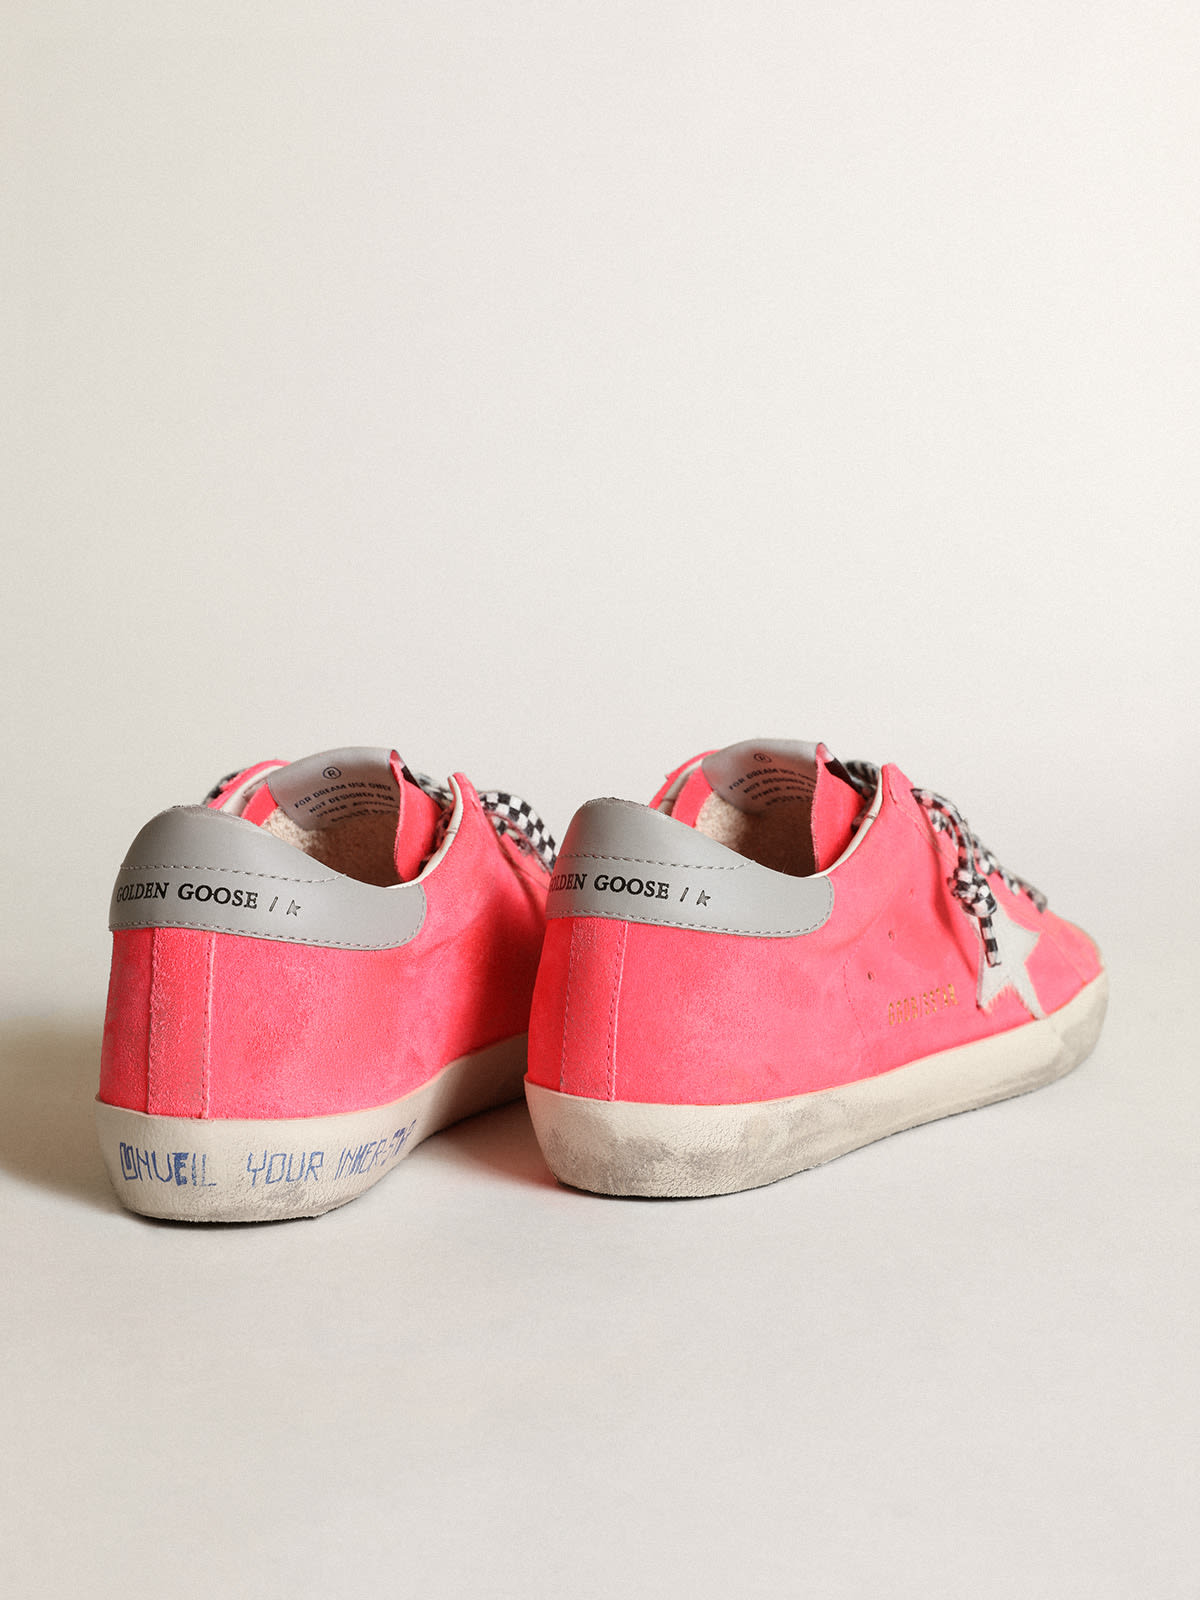 Golden Goose - Super-Star sneakers in fluorescent lobster-colored suede with a white pony skin star in 